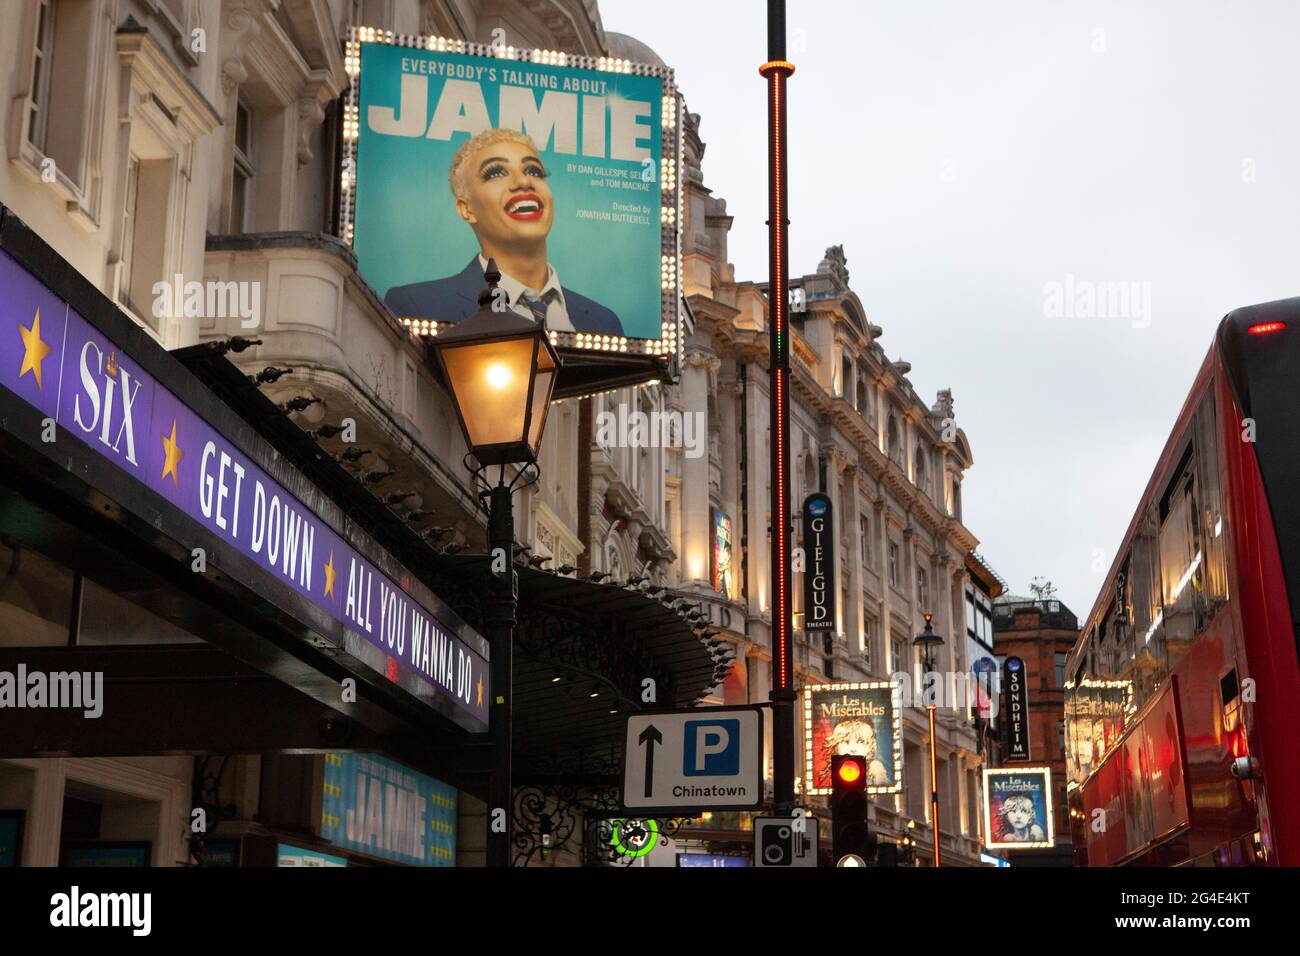 London, UK, 20 June 2021: Theatres on Shaftesbury Avenue, many of which remain closed until social distancing restrictions can be ended. Some shows with smaller casts have opened to reduced audiences with up to half of the seats kept empty. Anna Watson/Alamy Stock Photo